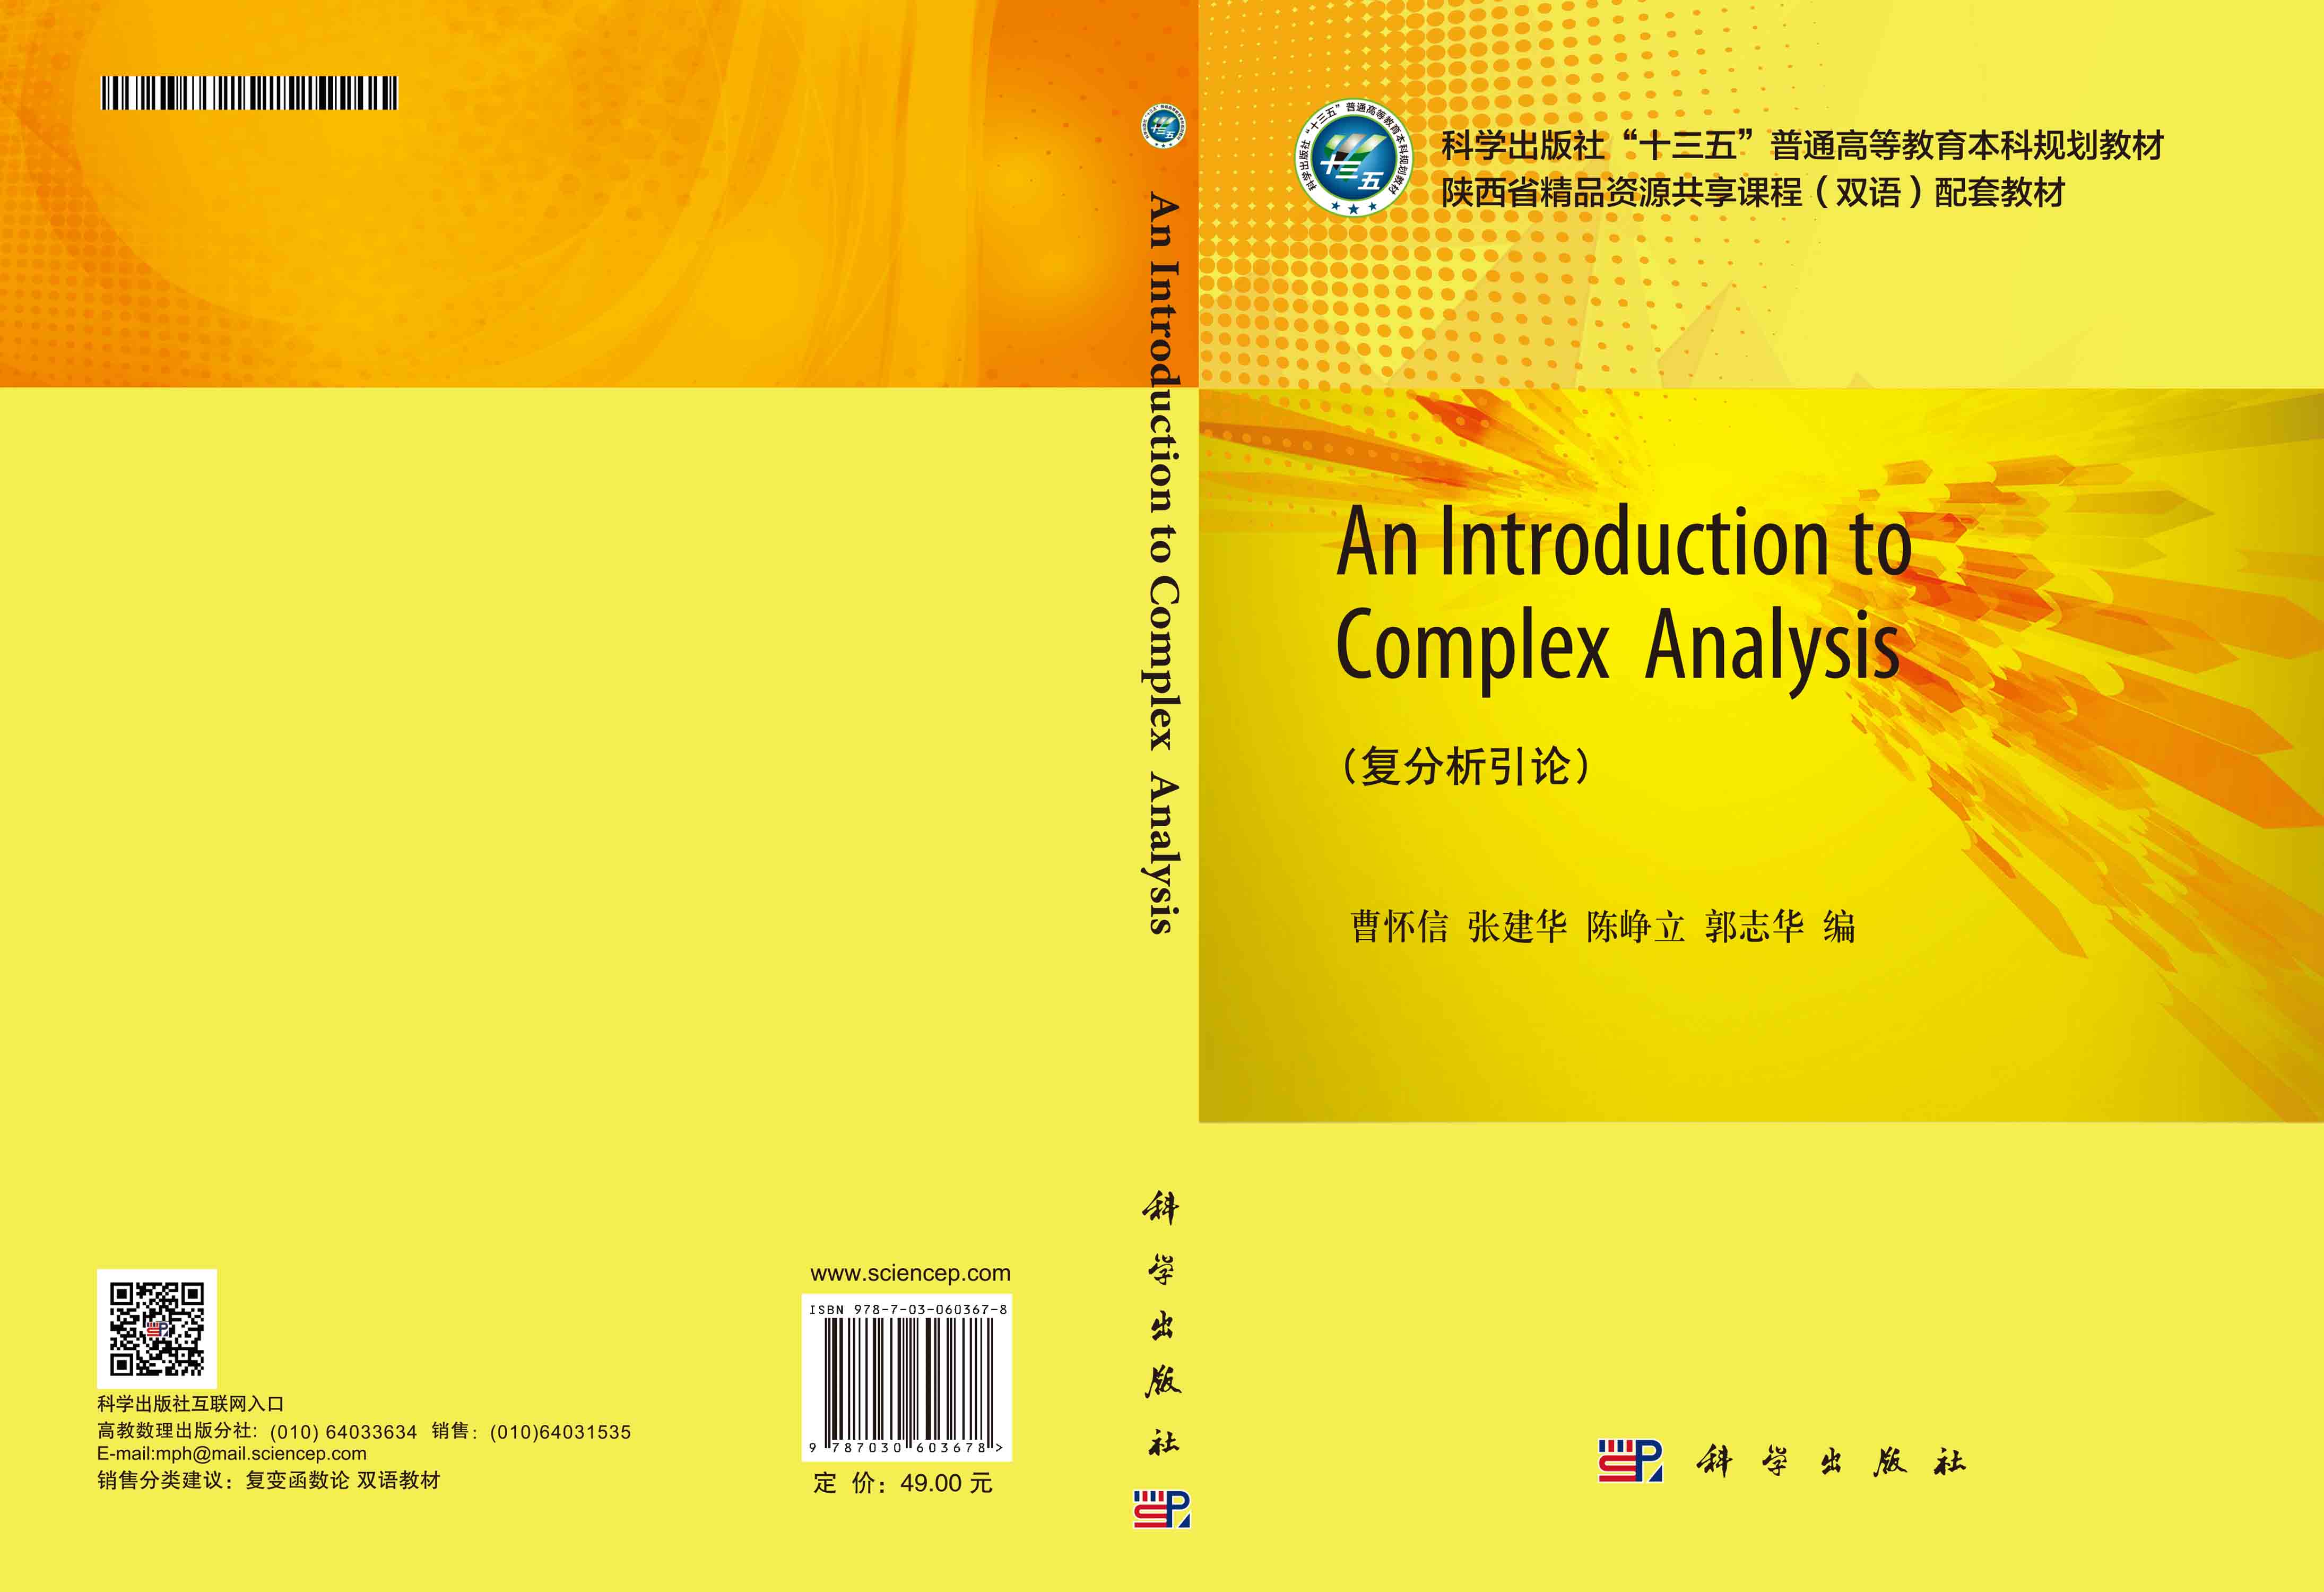 An Introduction to Complex Analysis（复分析引论）